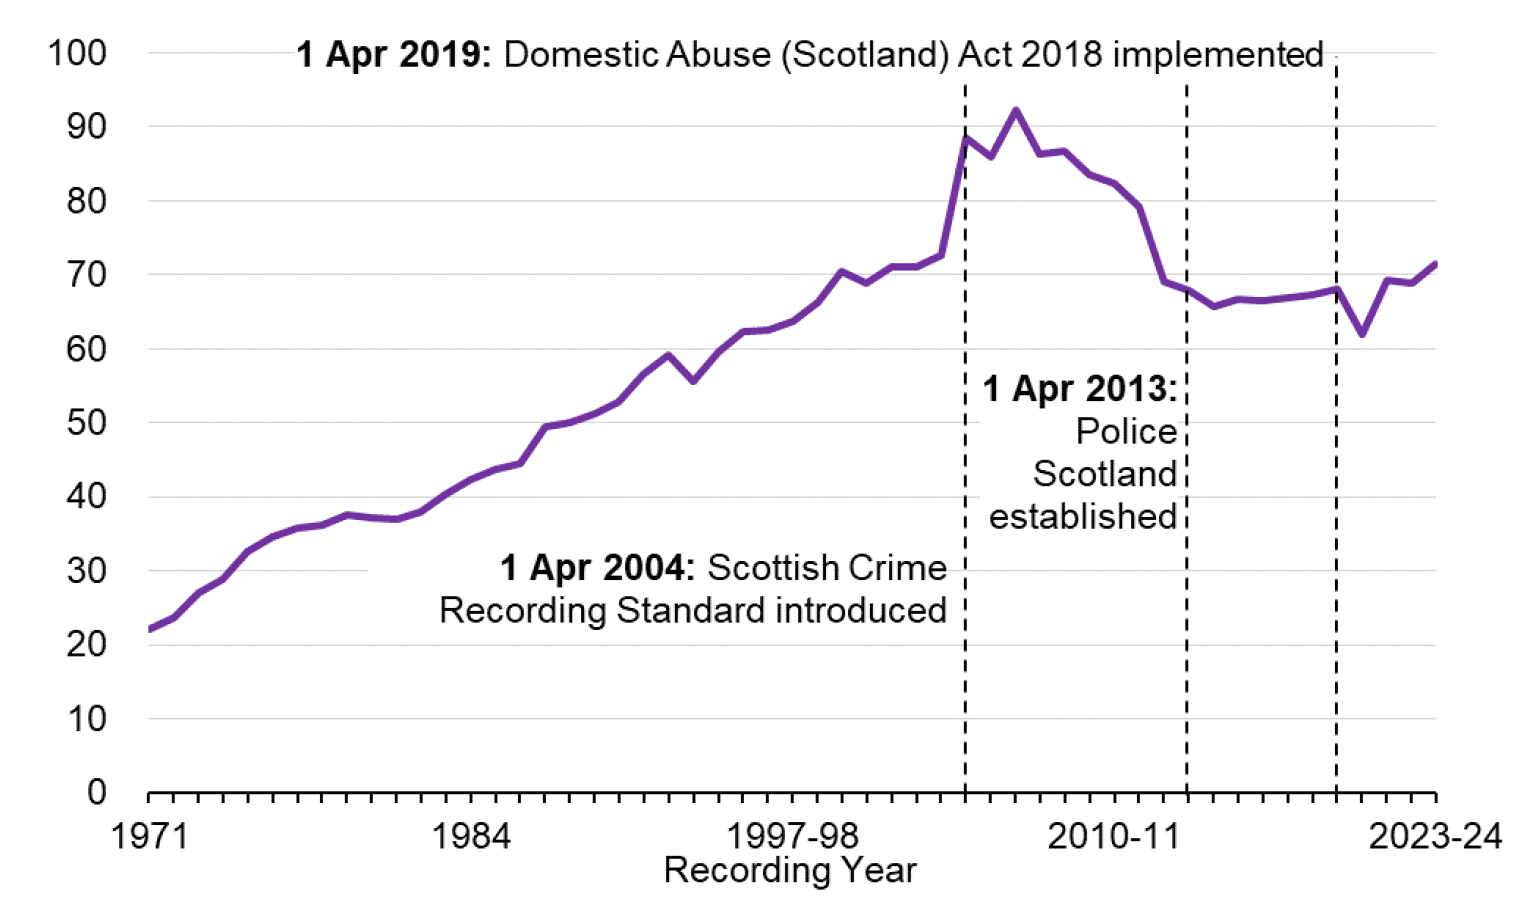 A line chart showing that Non-sexual crimes of violence generally increased between 1971 and 2006-07 when it peaked but then generally decreased between 2006-07 and 2023-24, though has increased in recent years. The lowest recorded level was in 1971.